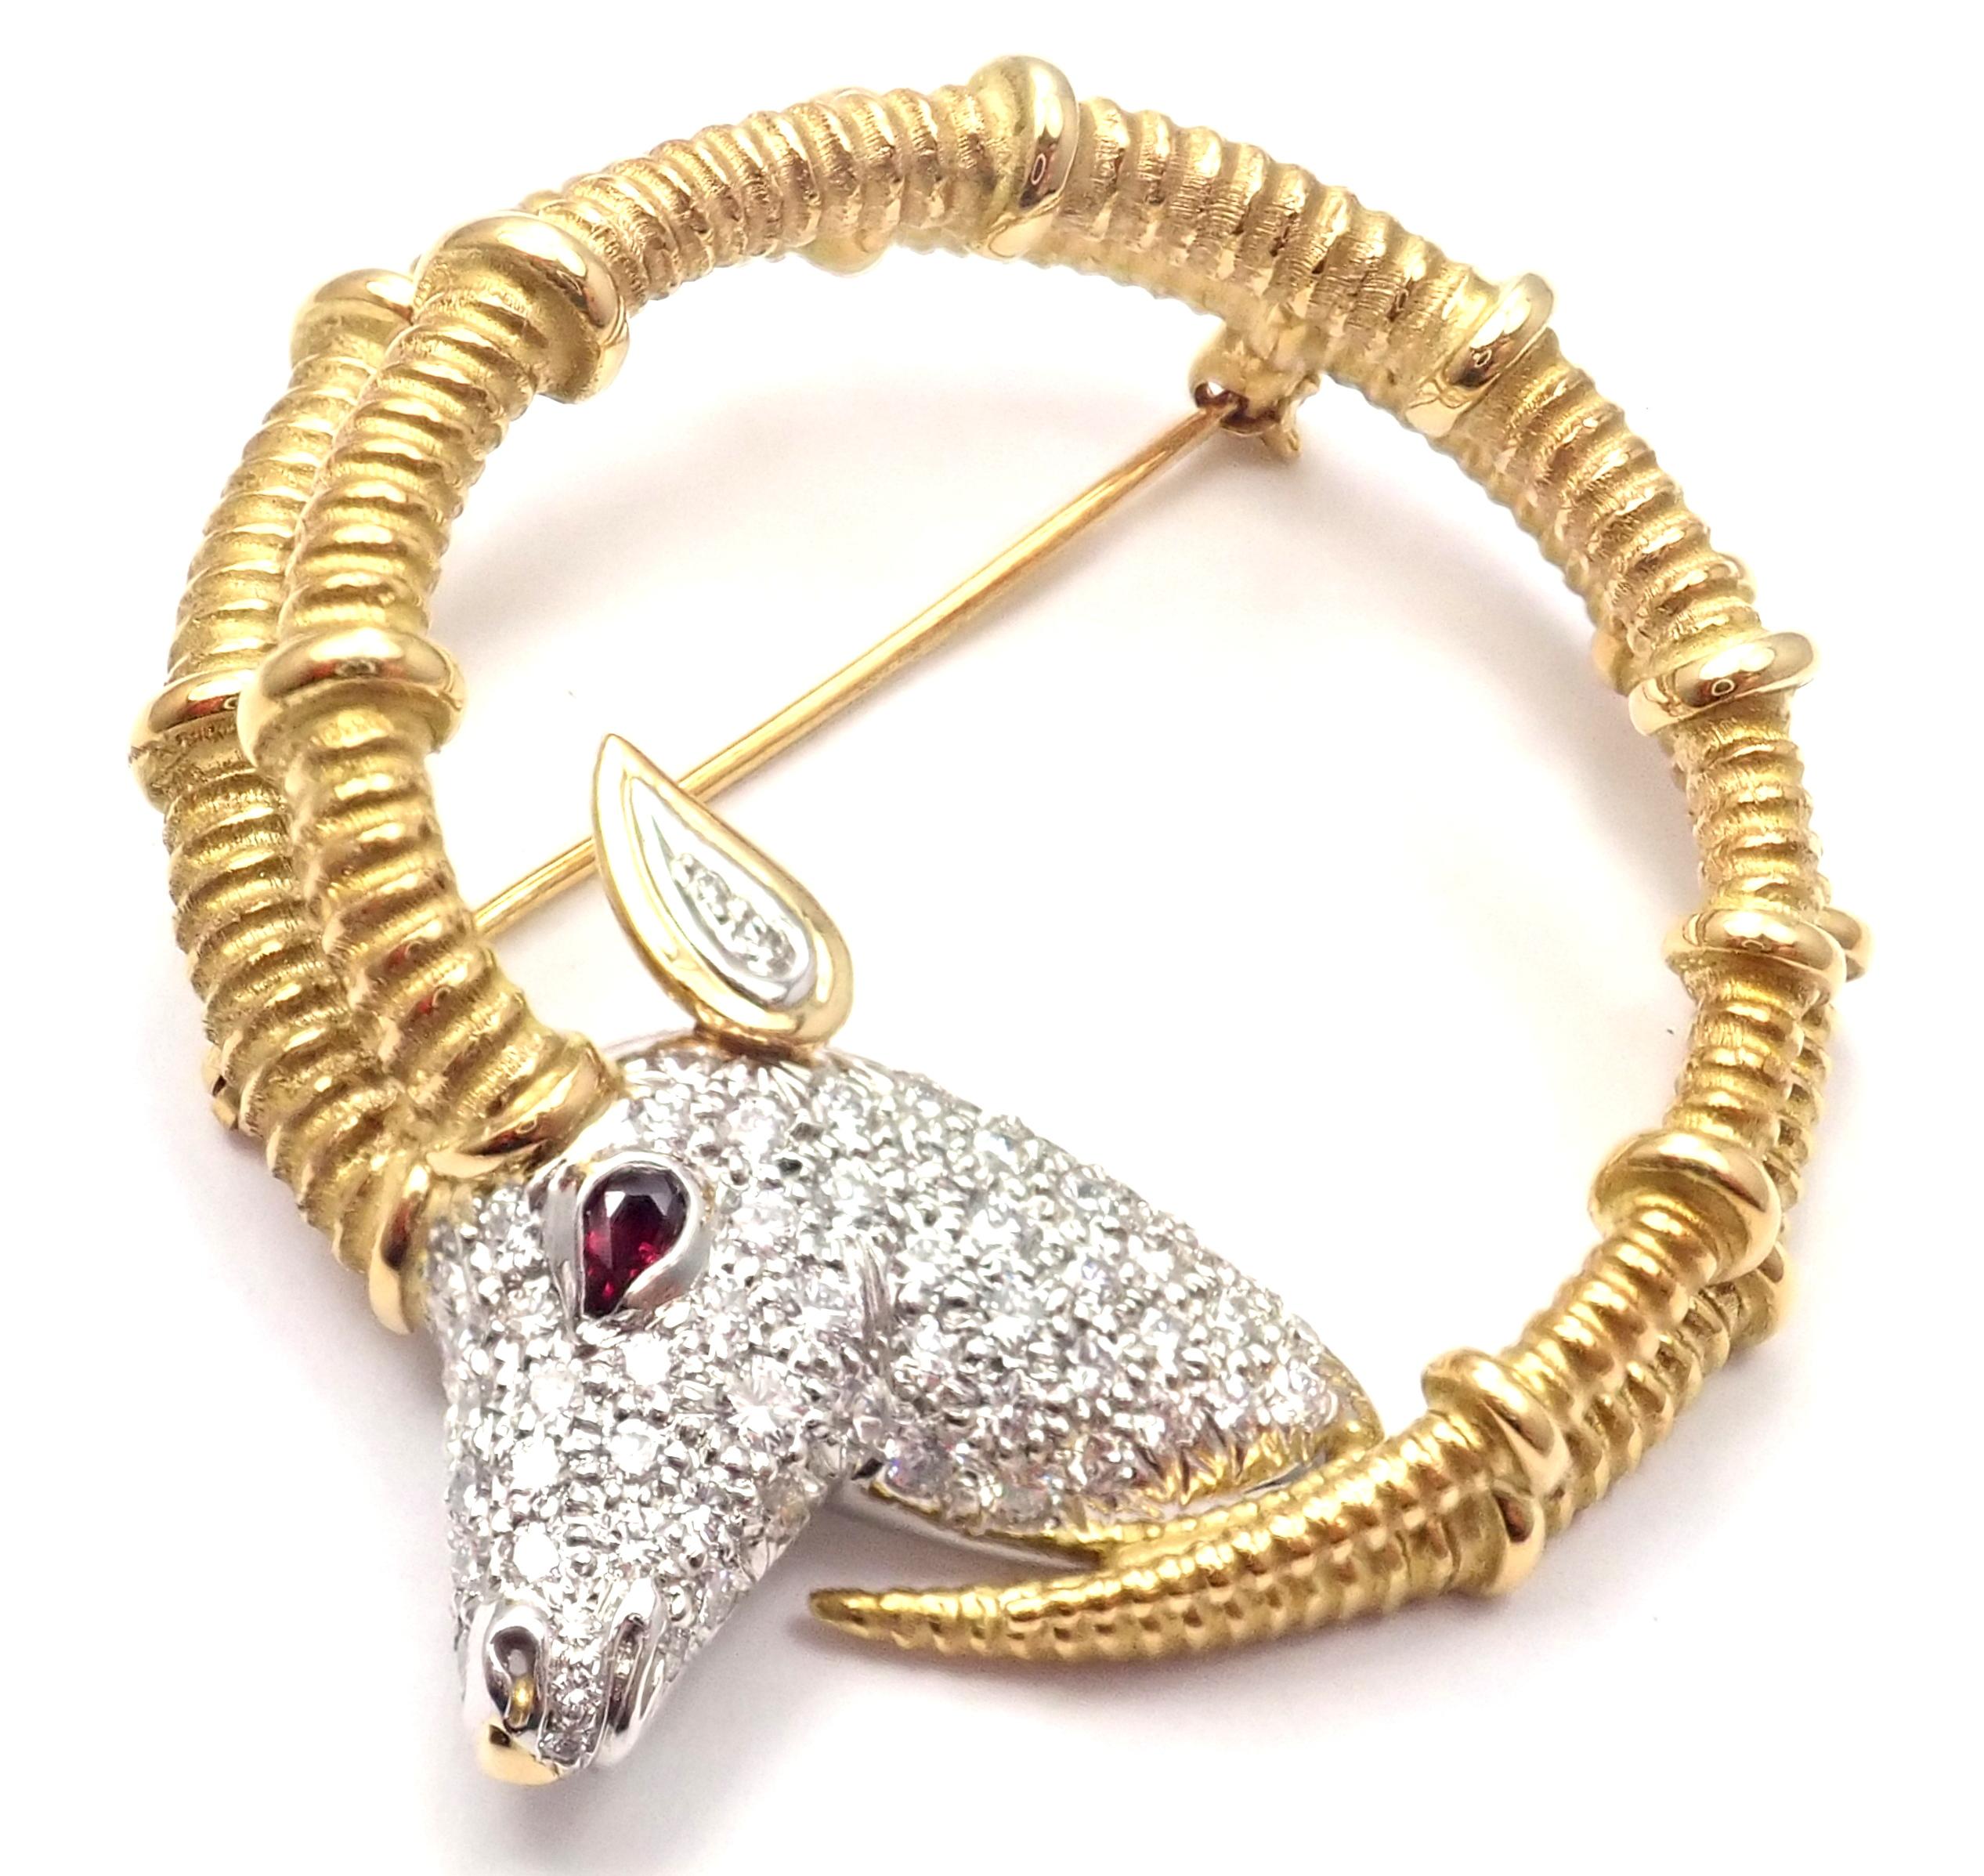 18k Yellow Gold and Platinum Diamond Ruby Ibex Pin Brooch by Jean Schlumberger for Tiffany & Co. 
With Round brilliant cut diamonds VVS1 clarity, E color 
total weight approx. 1.20ct  
1 ruby
Details:  
Weight: 21.4 grams 
Measurements: 1.63